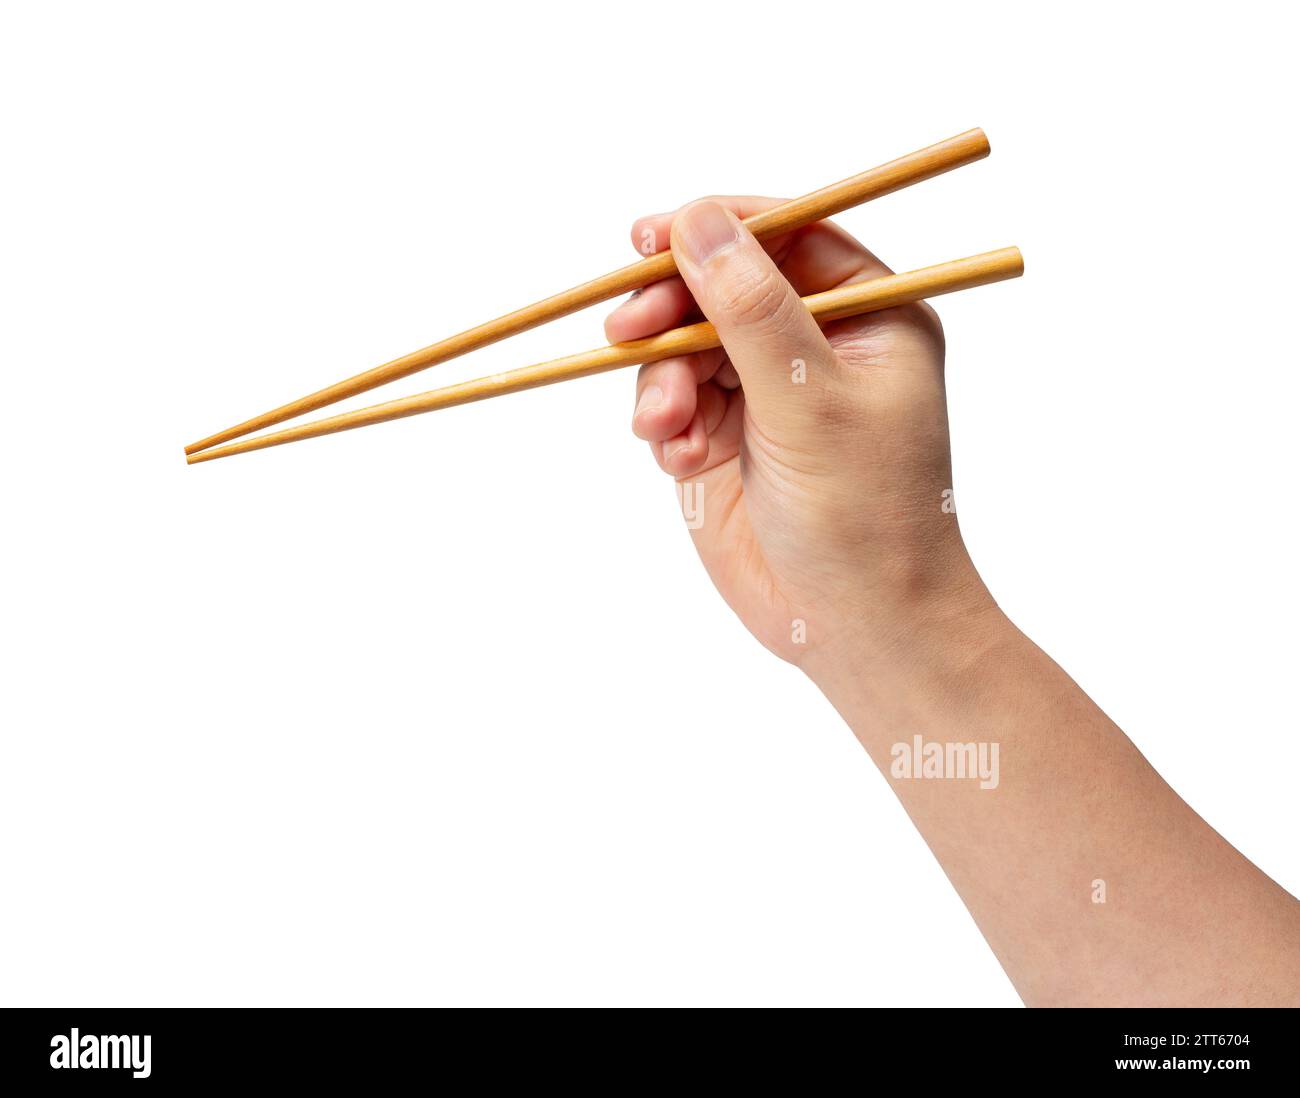 Wooden chopsticks in hand isolated on white background. Stock Photo